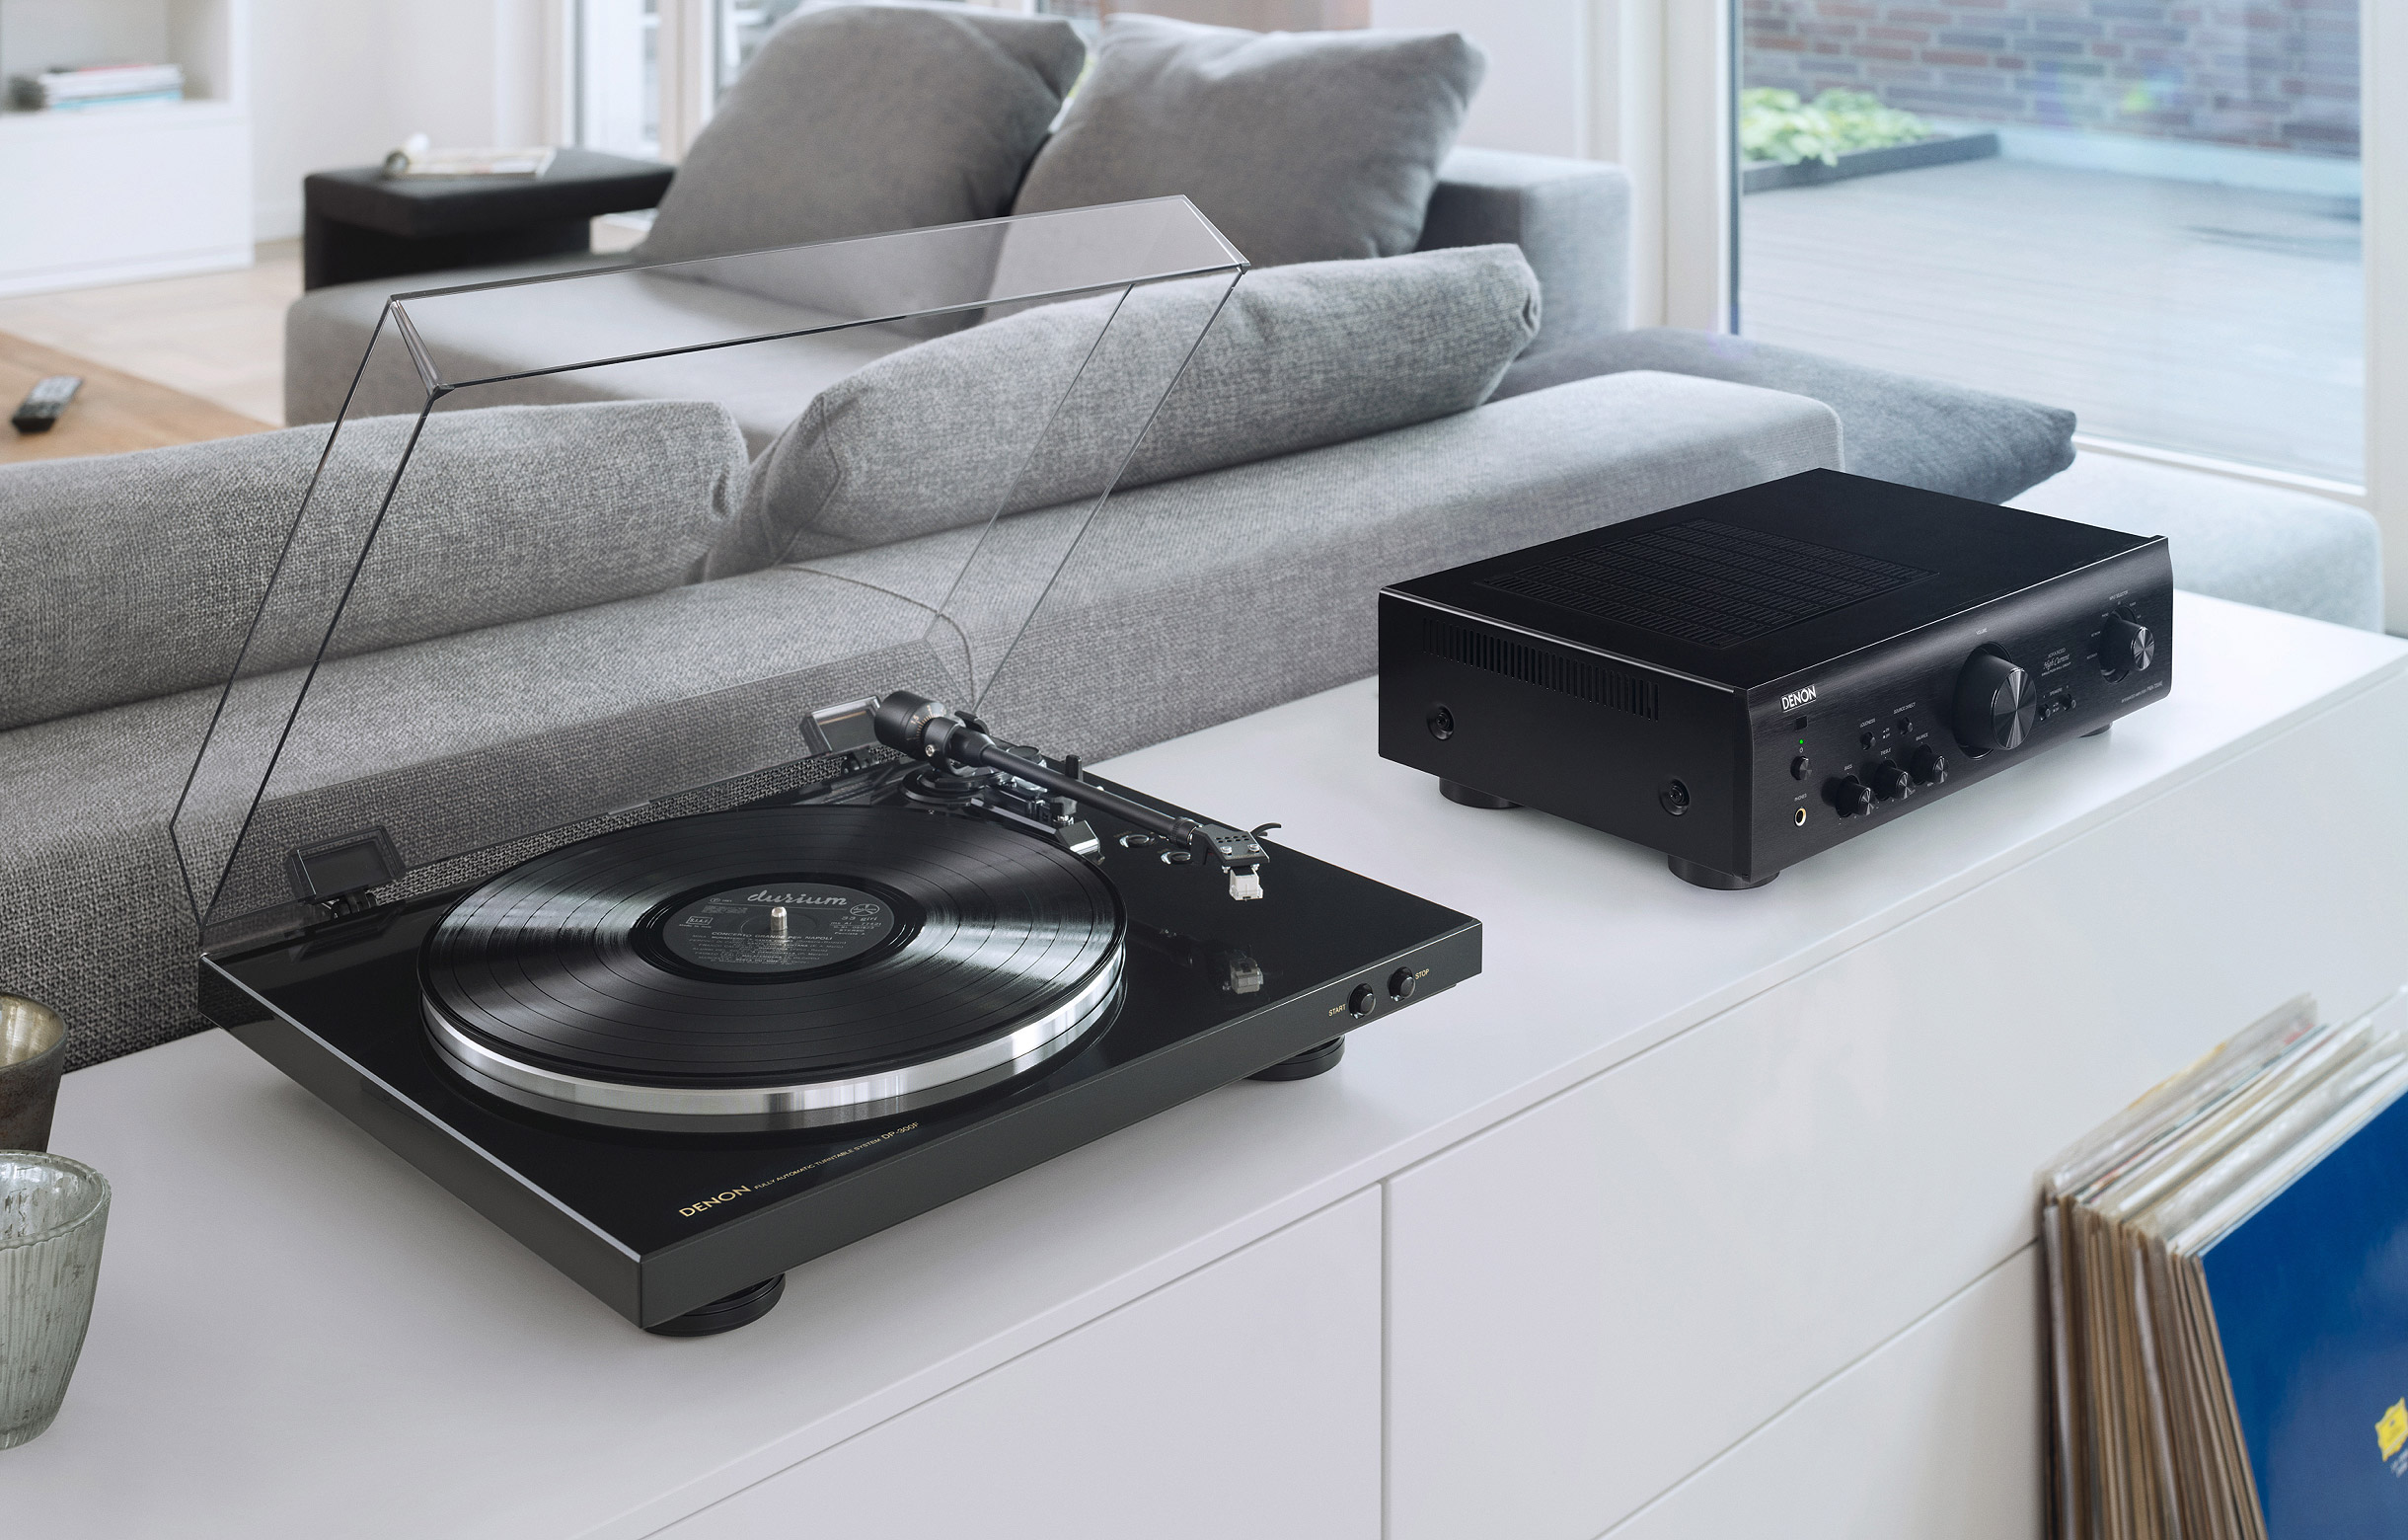 Rent Denon DP-300F HiFi Turntable from €13.90 per month